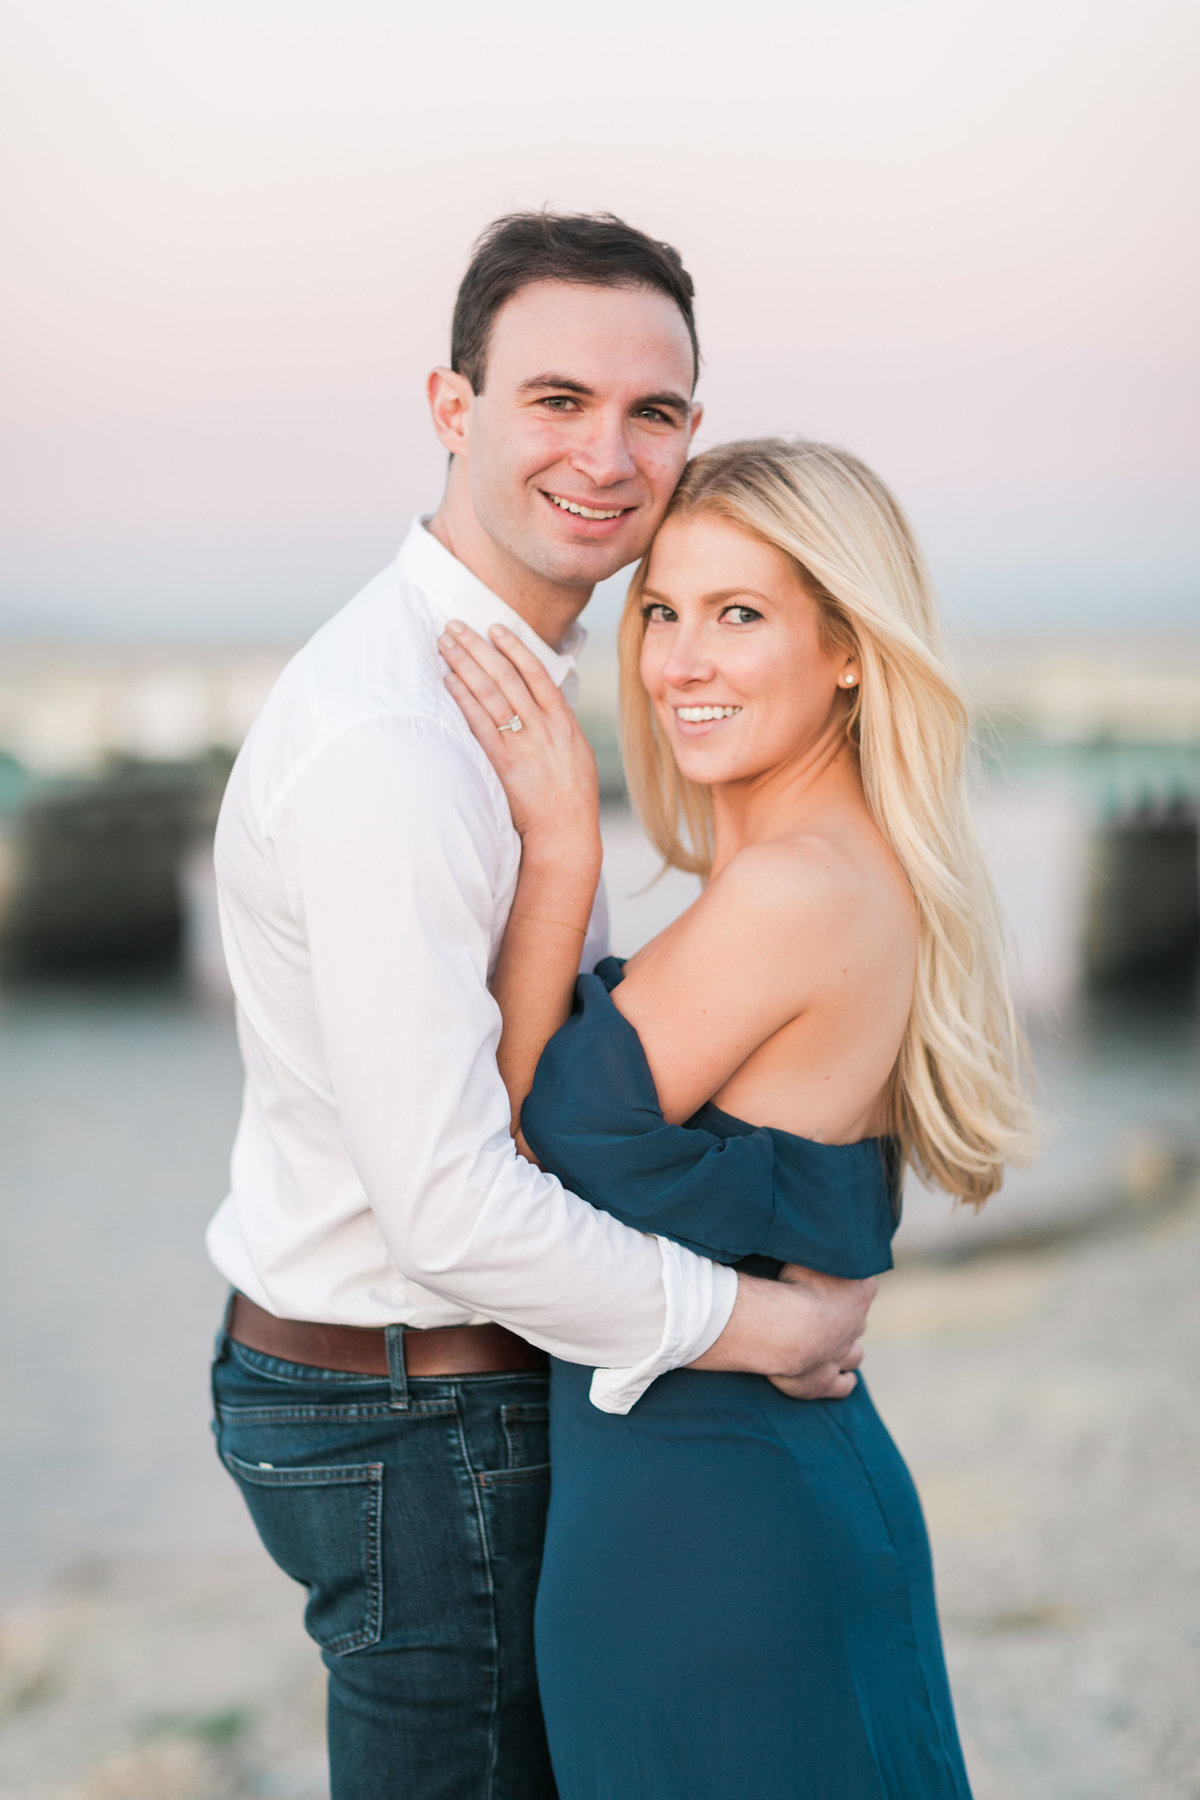 Venice Canal Beach Engagement Session_Valorie Darling Photography-7101